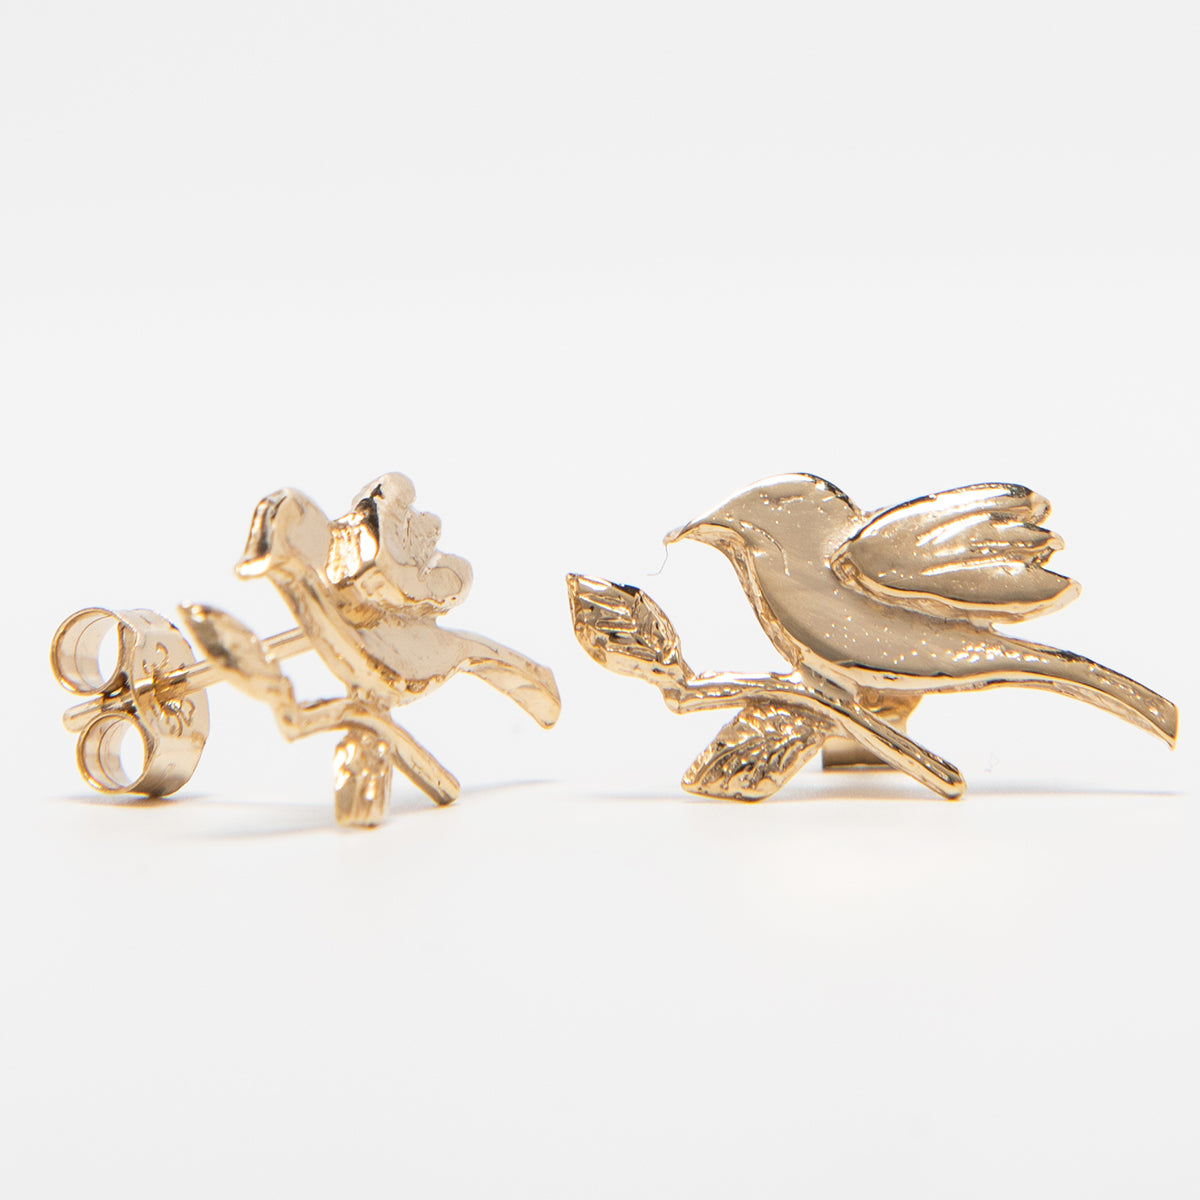 Frida Kahlo Bird Stud Earrings 18ct Gold Vermeil by Licensed To Charm